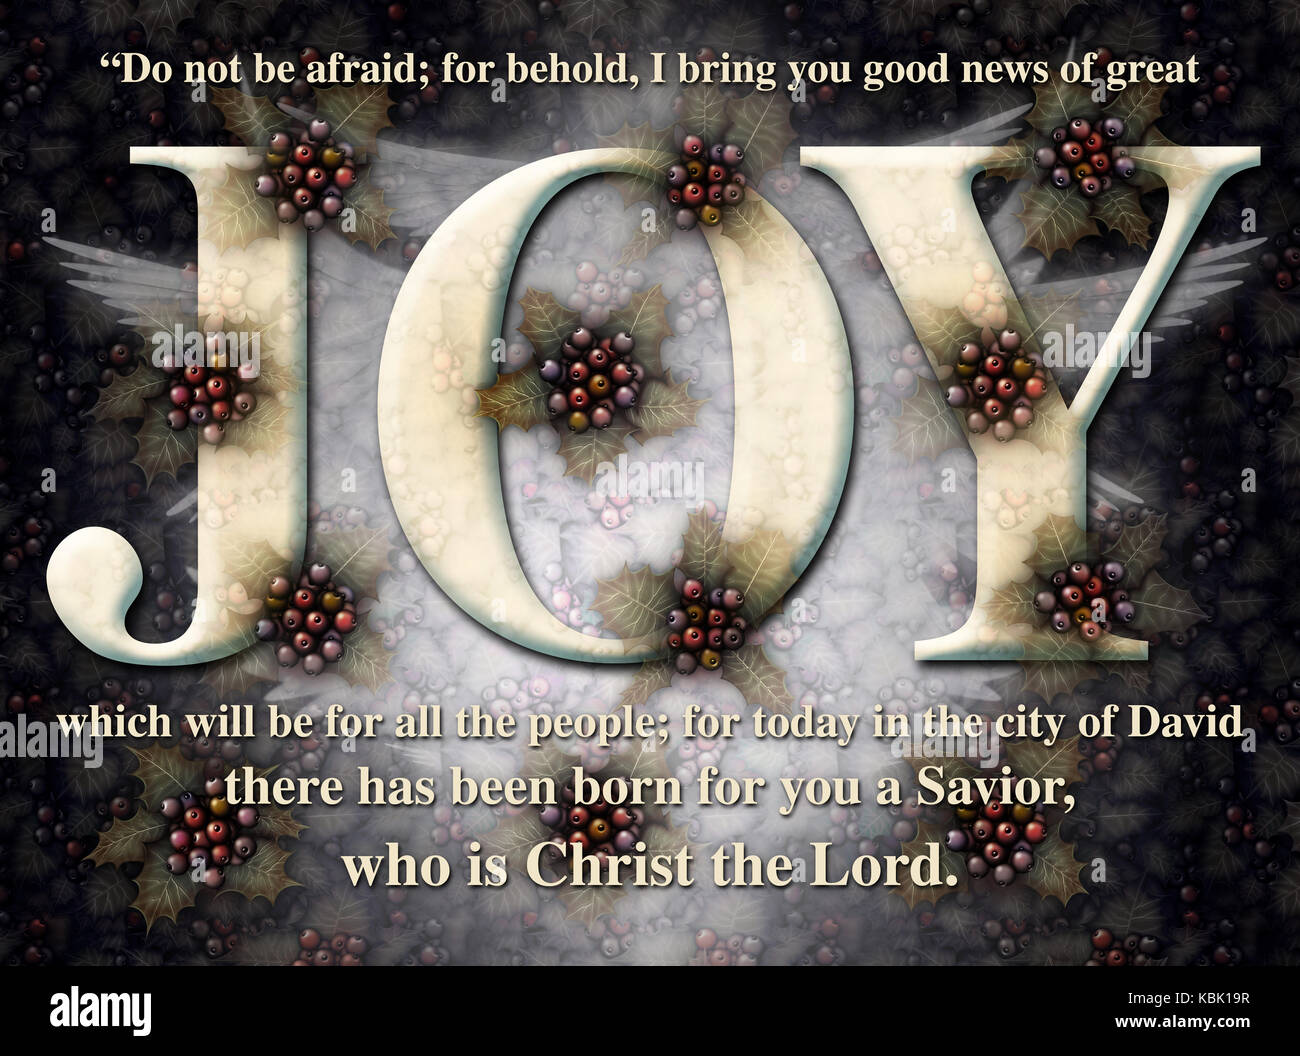 Digital illustration with the word Joy as the key feature, decorated with Holly, Angel wings, and a bible verse announcing the birth of Christ. Stock Photo